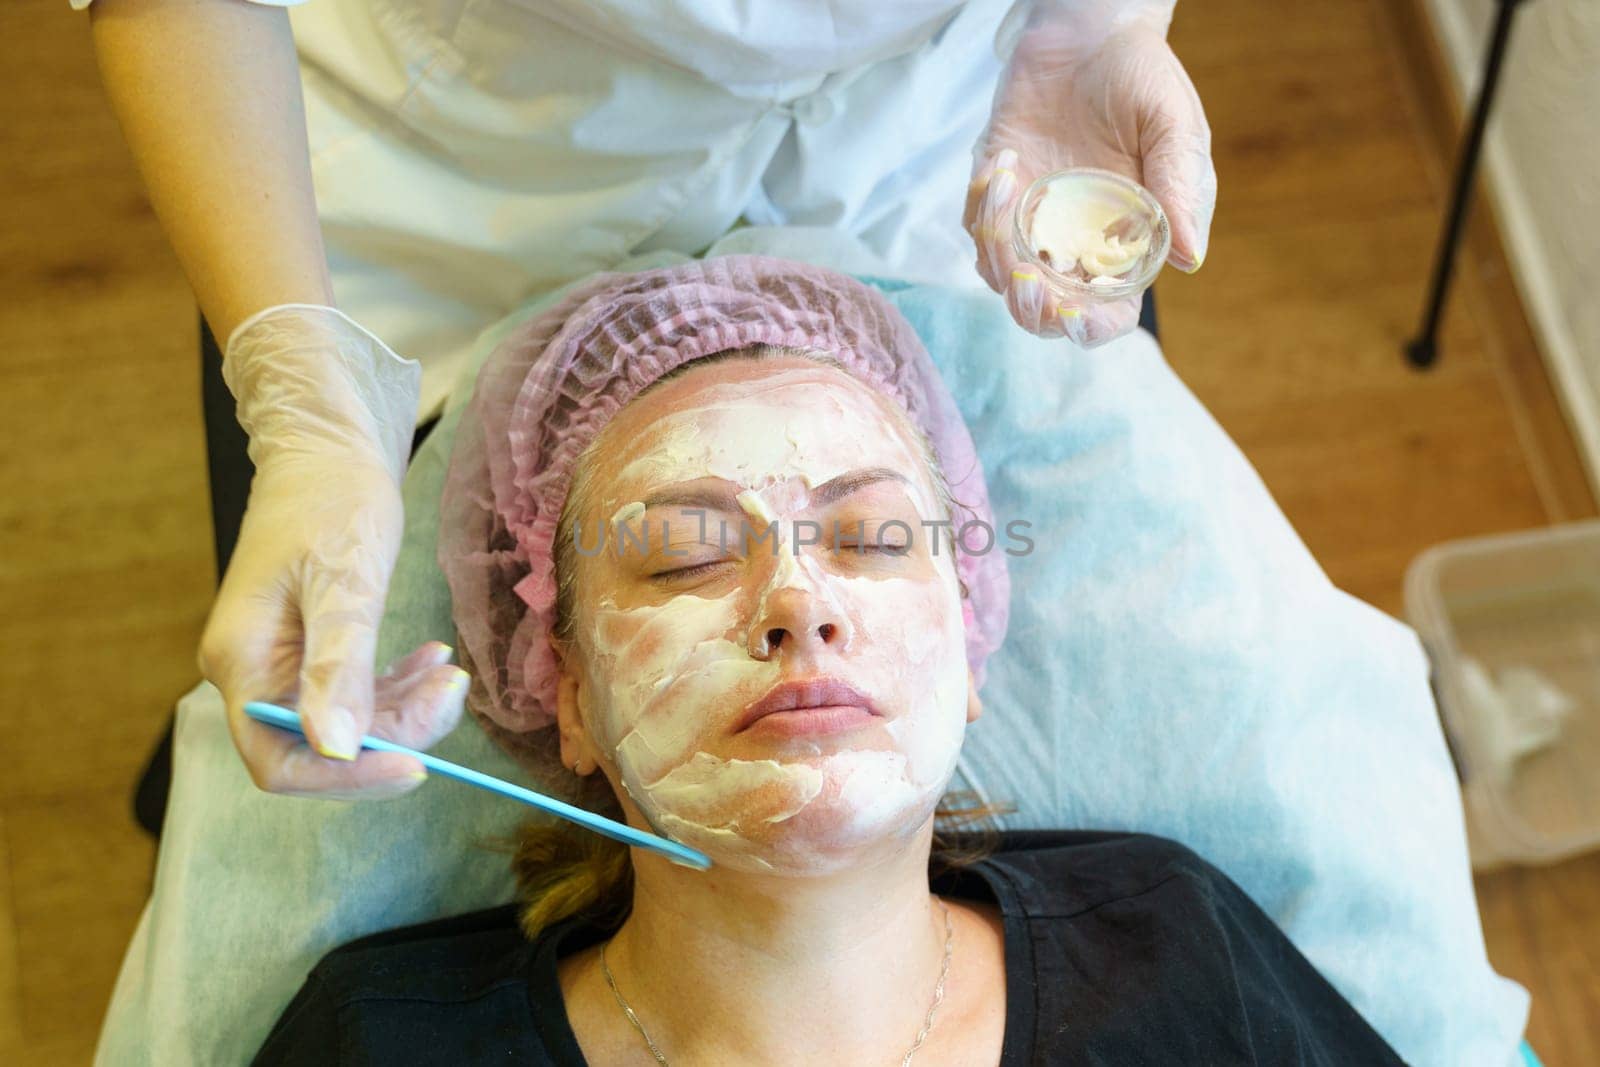 A woman is having a facial mask applied to her face at a spa or beauty salon.